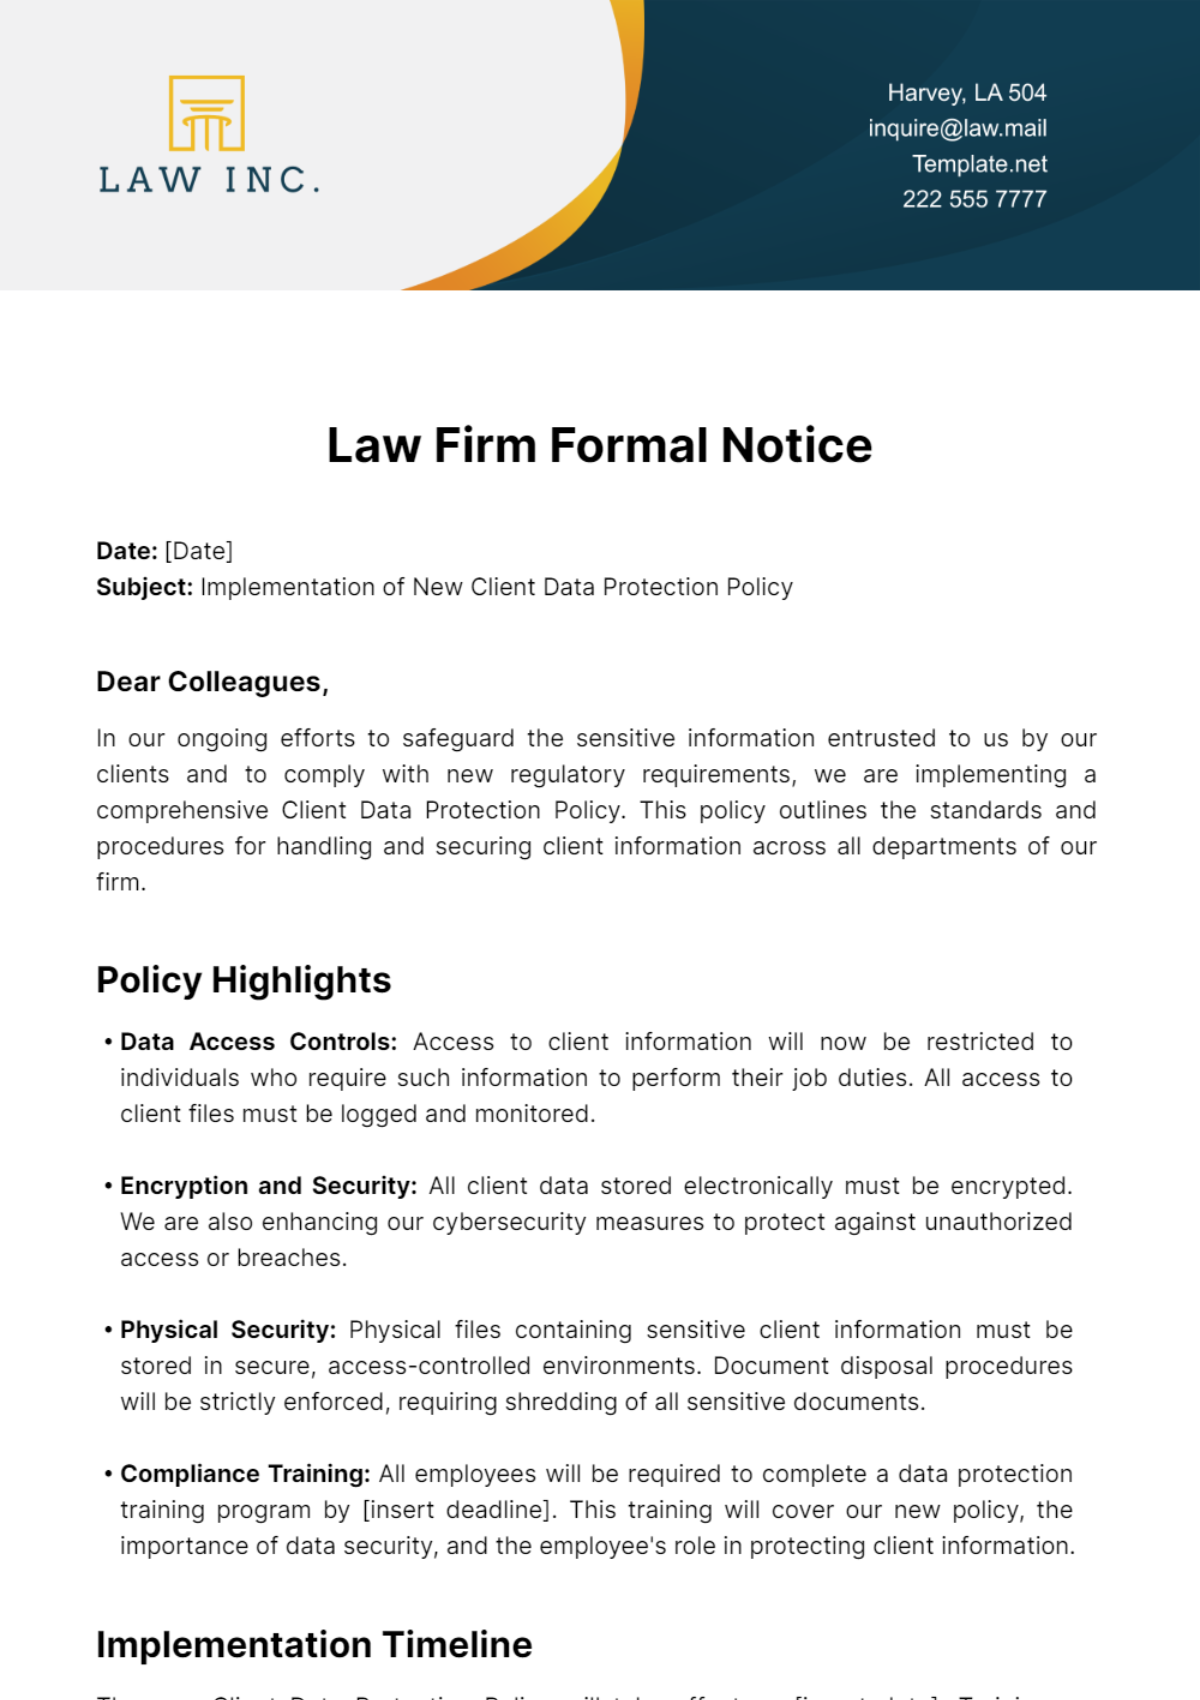 Law Firm Formal Notice Template